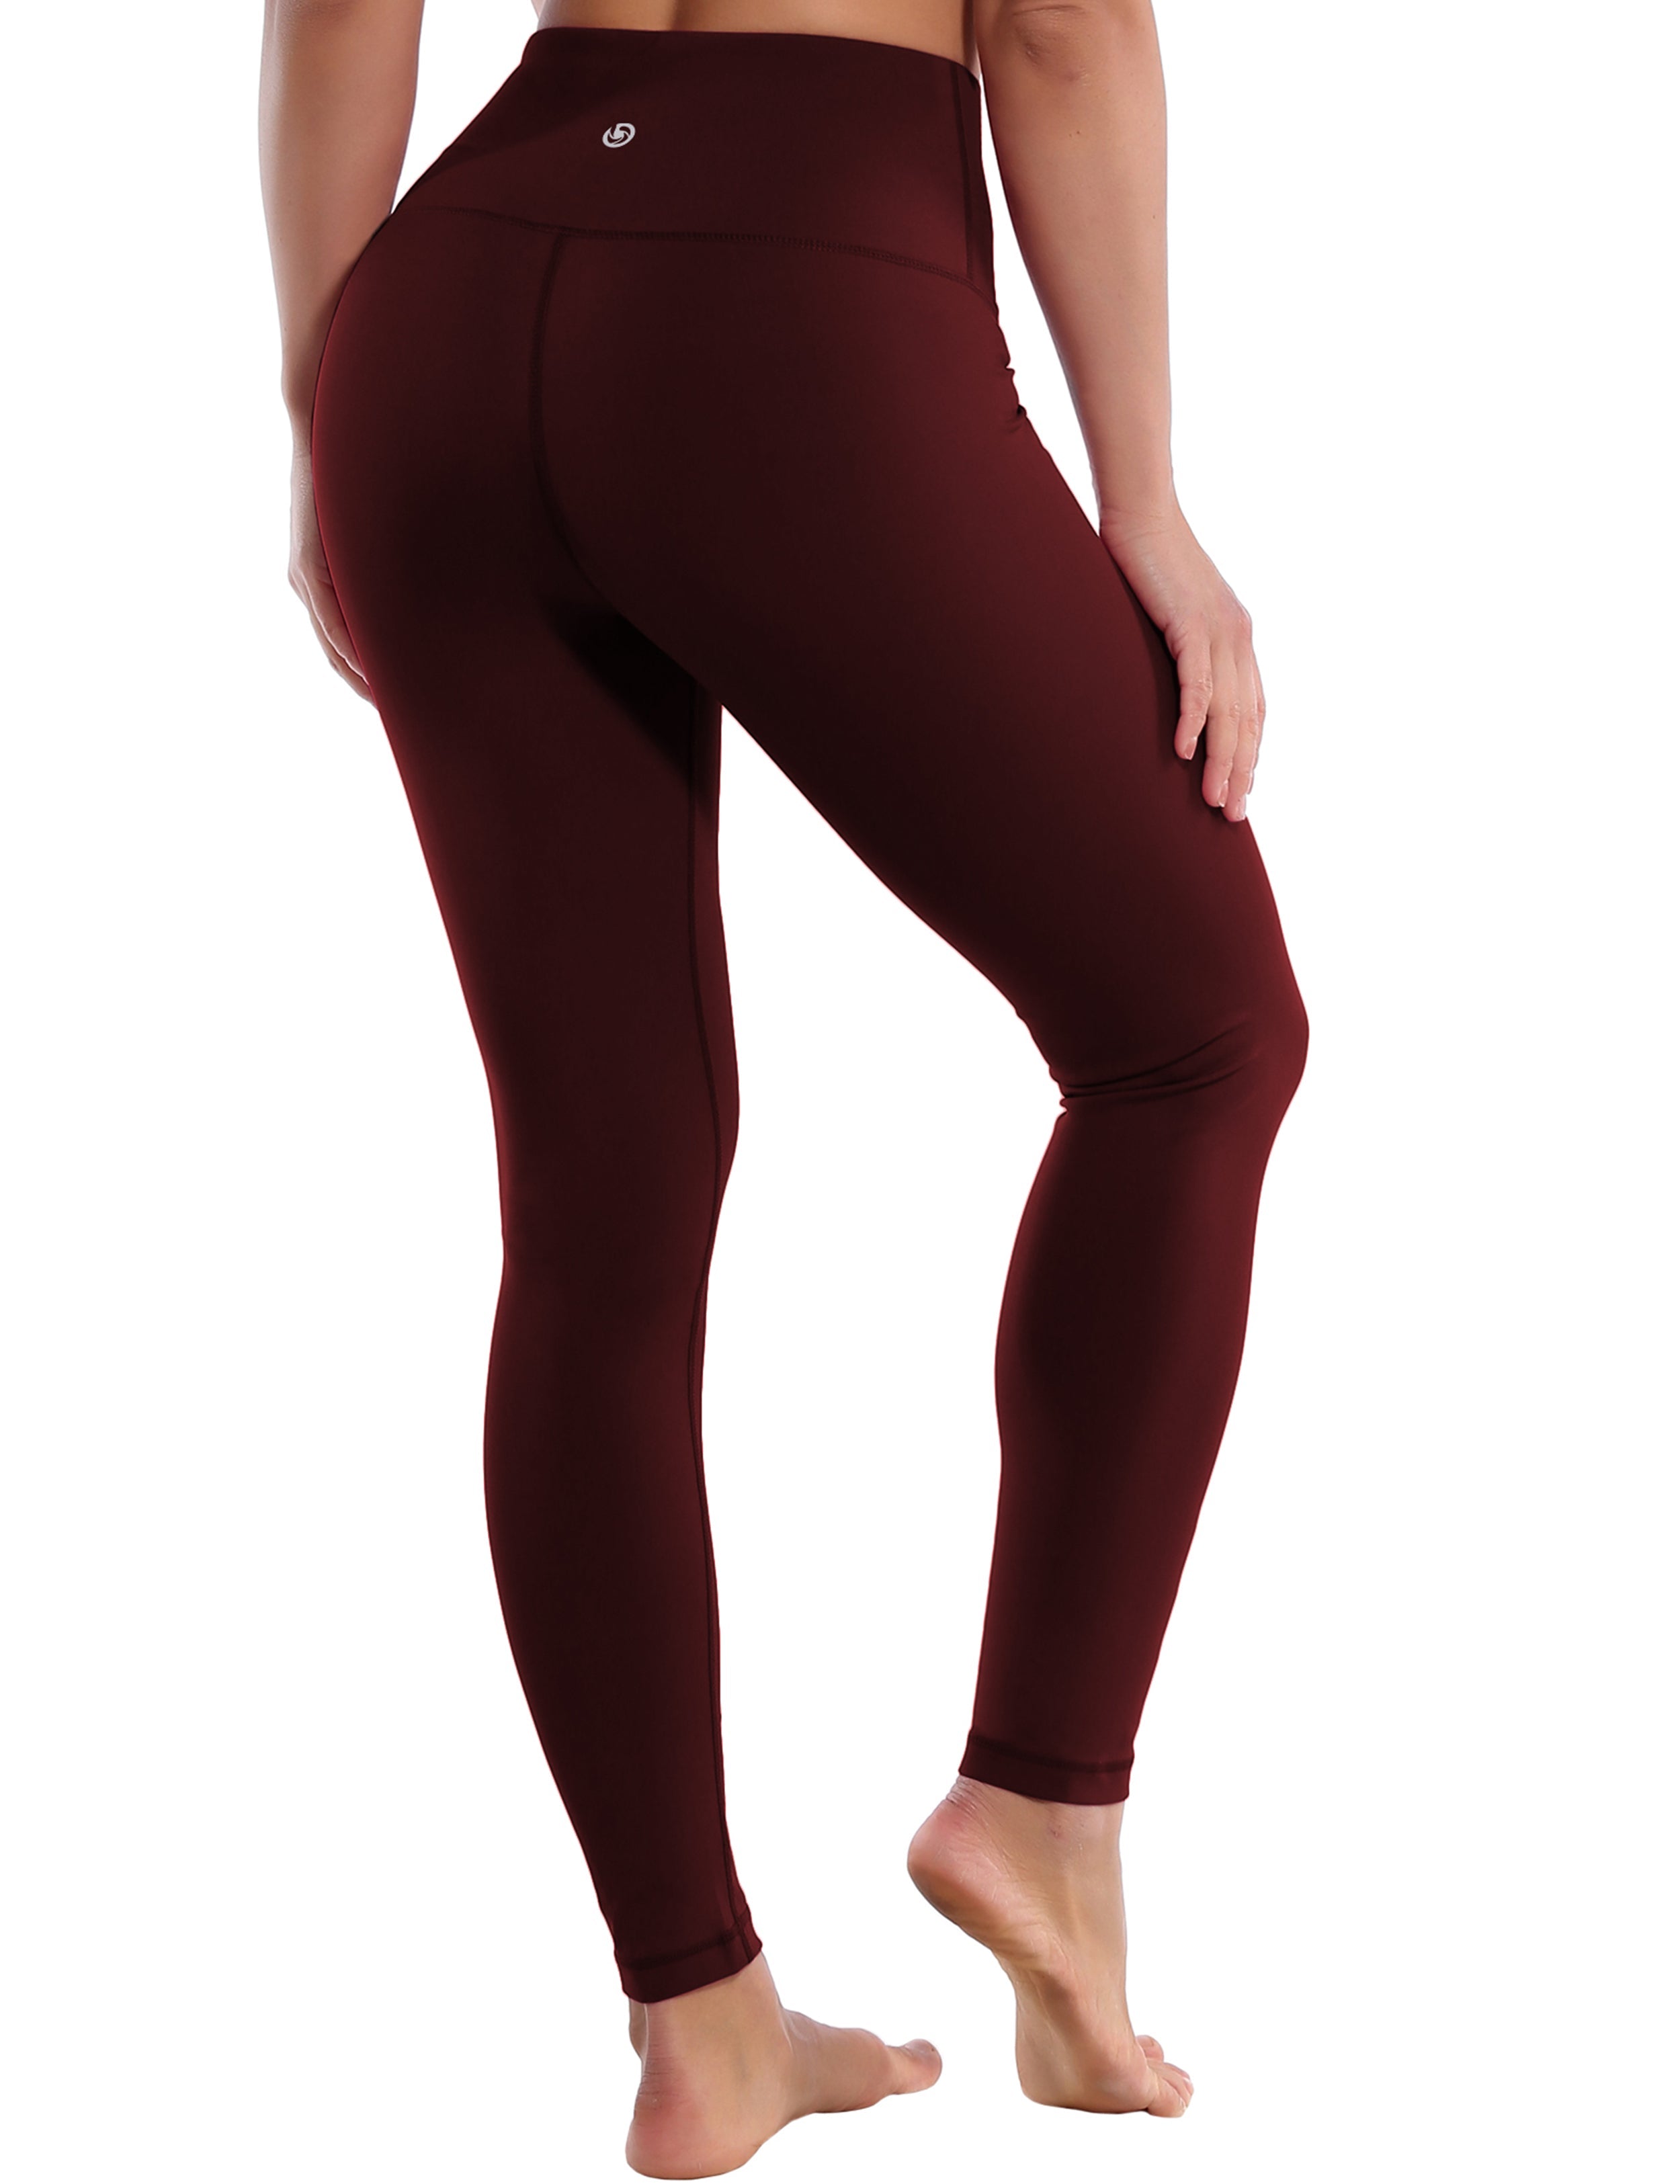 High Waist Gym Pants cherryred 75%Nylon/25%Spandex Fabric doesn't attract lint easily 4-way stretch No see-through Moisture-wicking Tummy control Inner pocket Four lengths